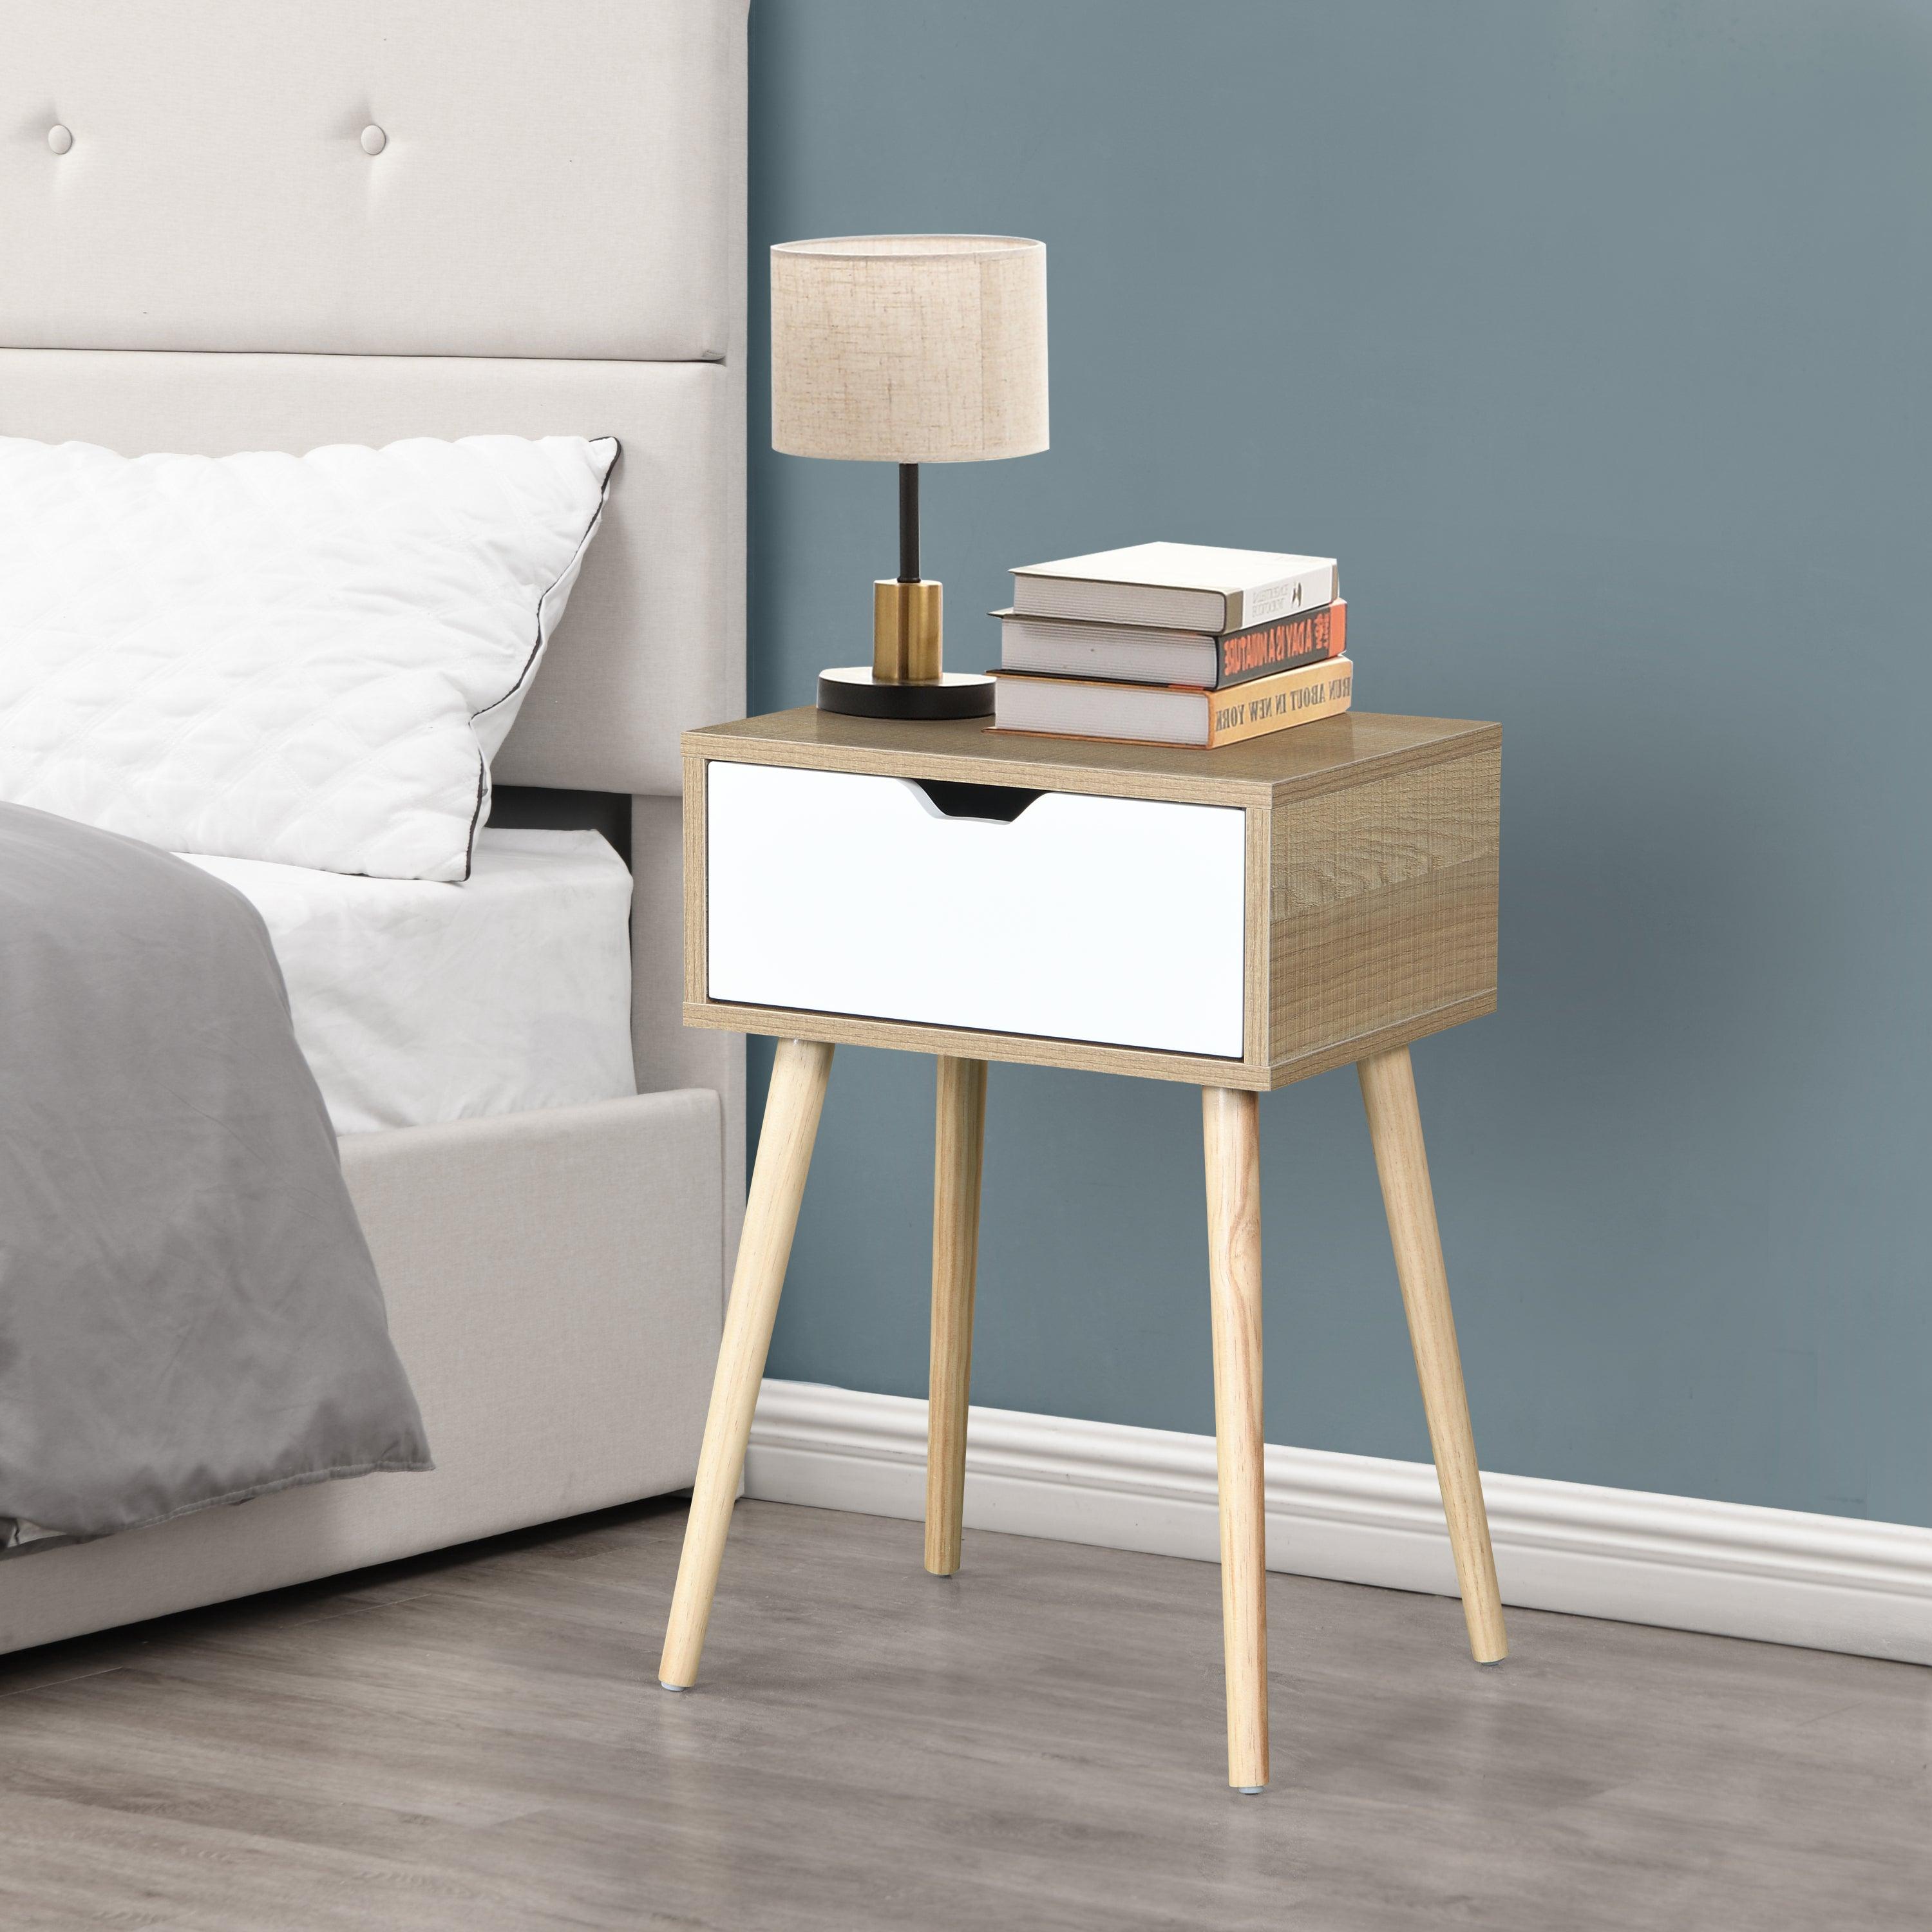 🆓🚛 Side Table With 1 Drawer & Rubber Wood Legs, Mid-Century Modern Storage Cabinet for Bedroom Living Room Furniture, White With Solid Wood Color